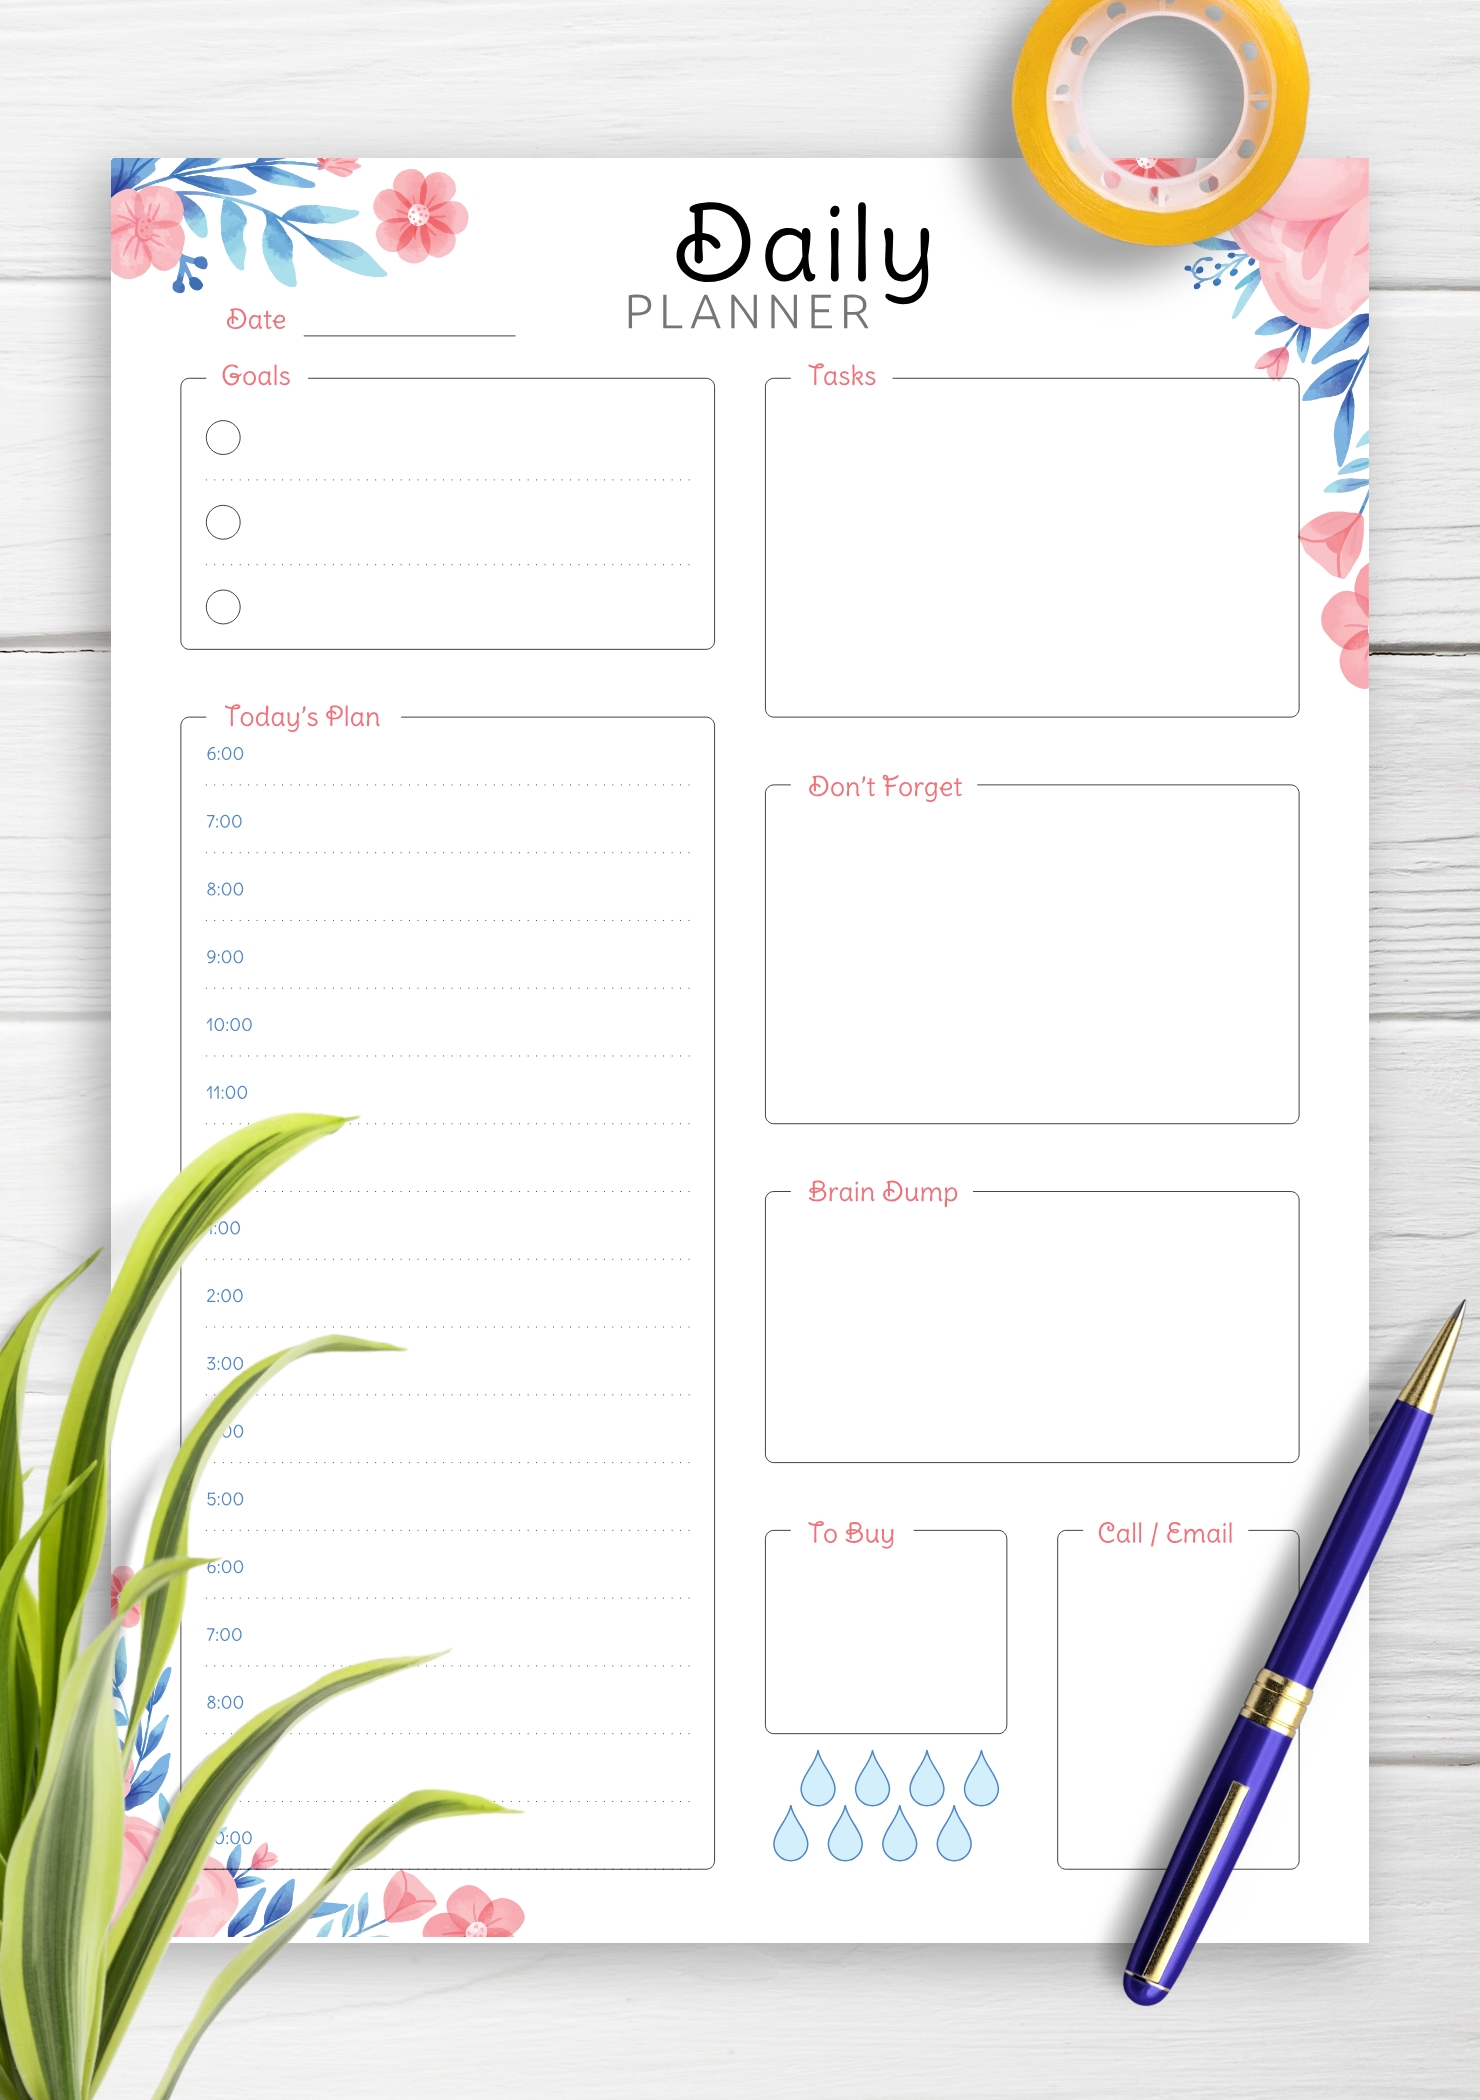 Download Printable Hourly Planner With Daily Tasks &amp; Goals Pdf 5 Day Hourly Calendar Template